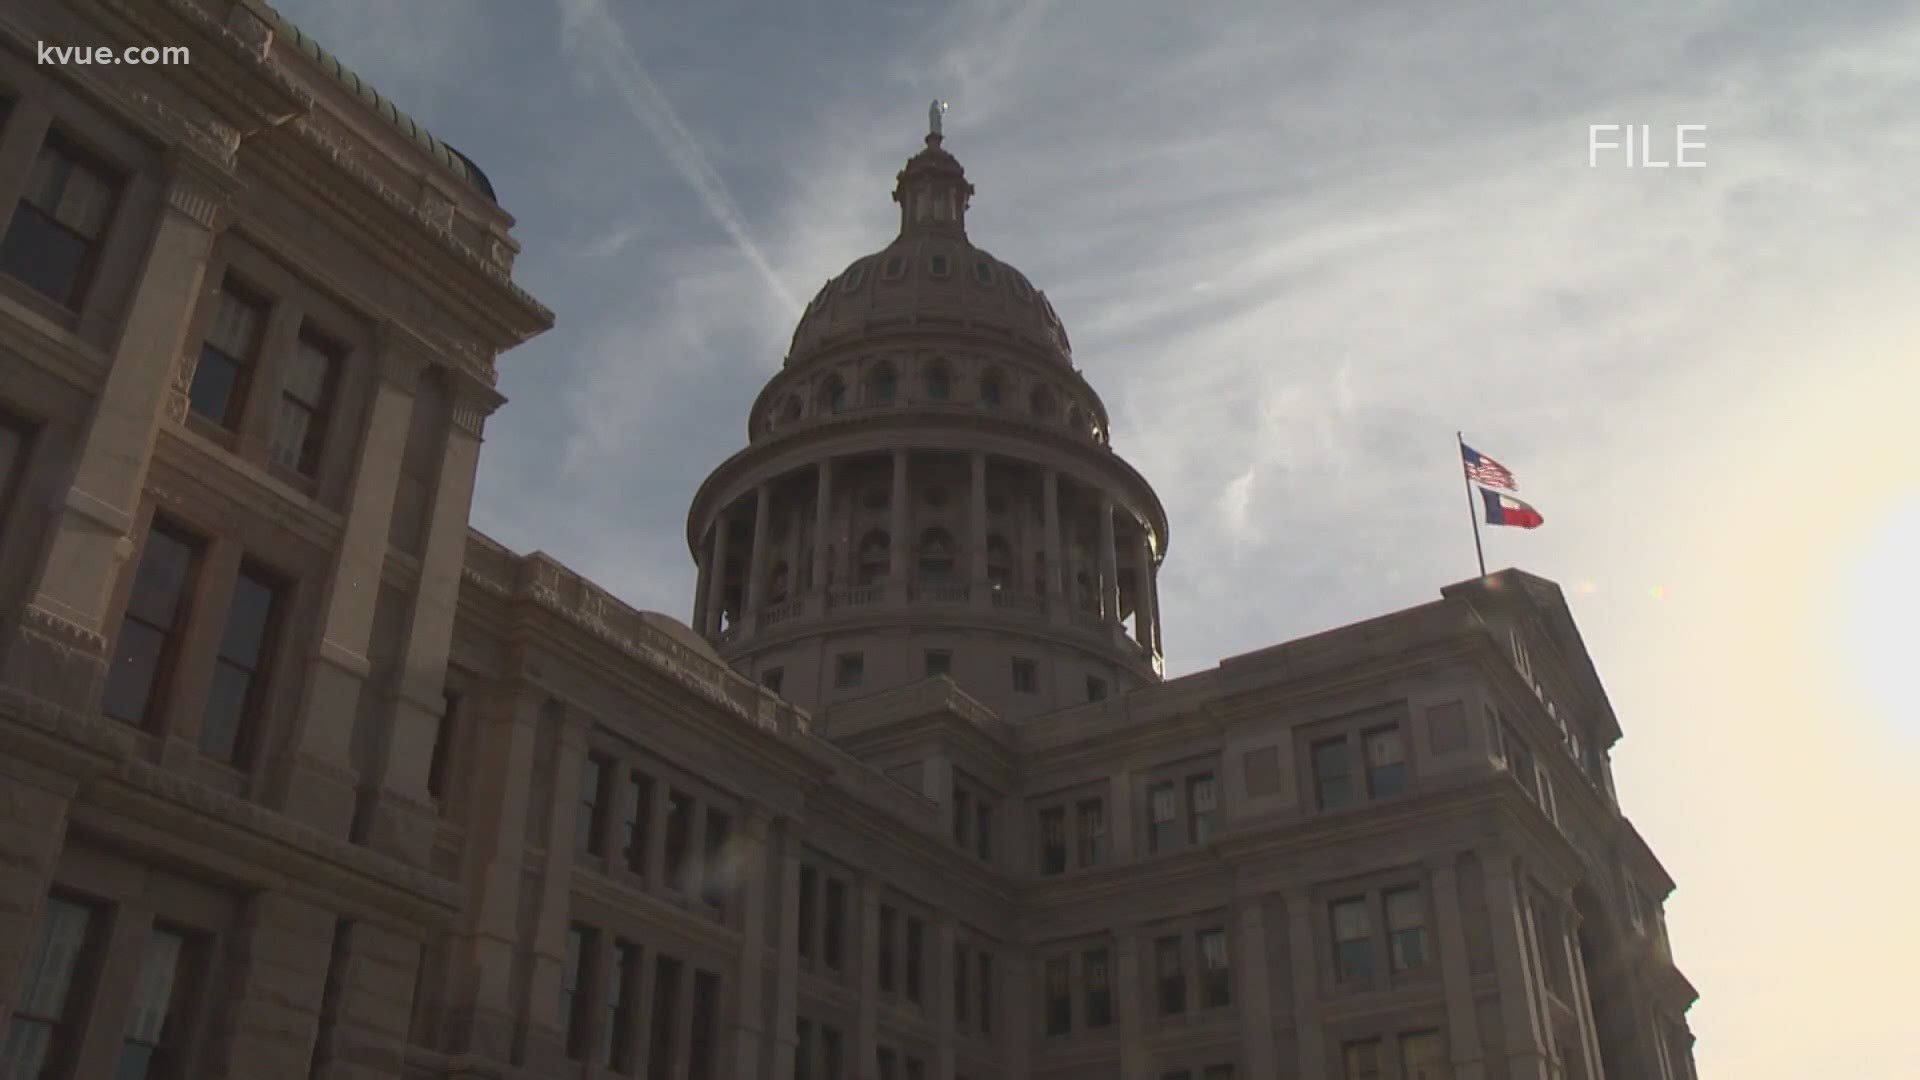 In the 2020 election, the GOP maintained its control of the Texas House of Representatives. KVUE's Molly Oak breaks down the state elections.